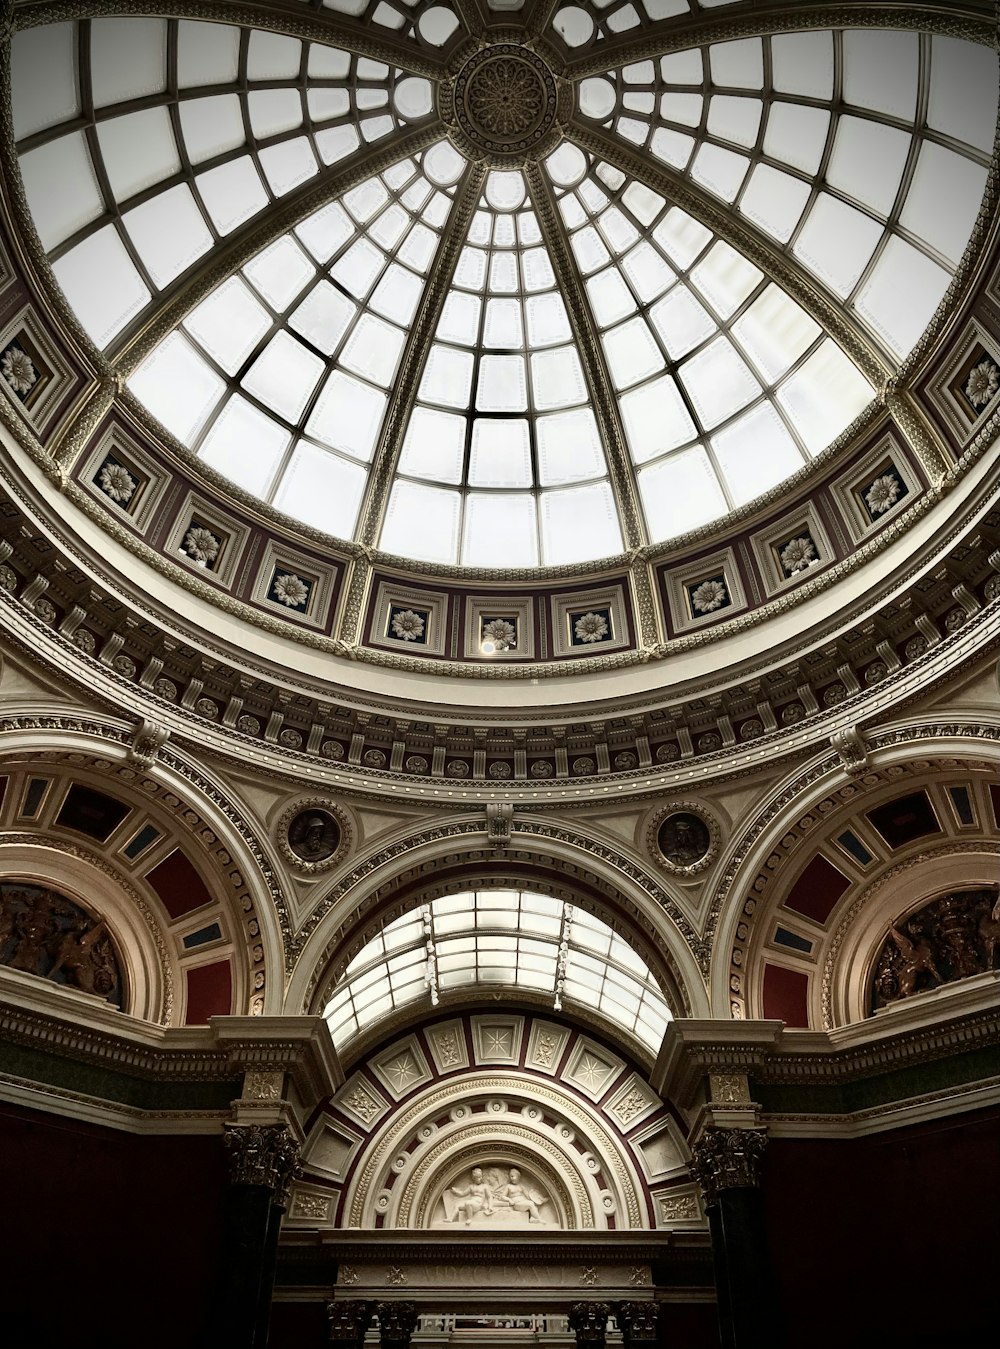 a domed glass ceiling in a building